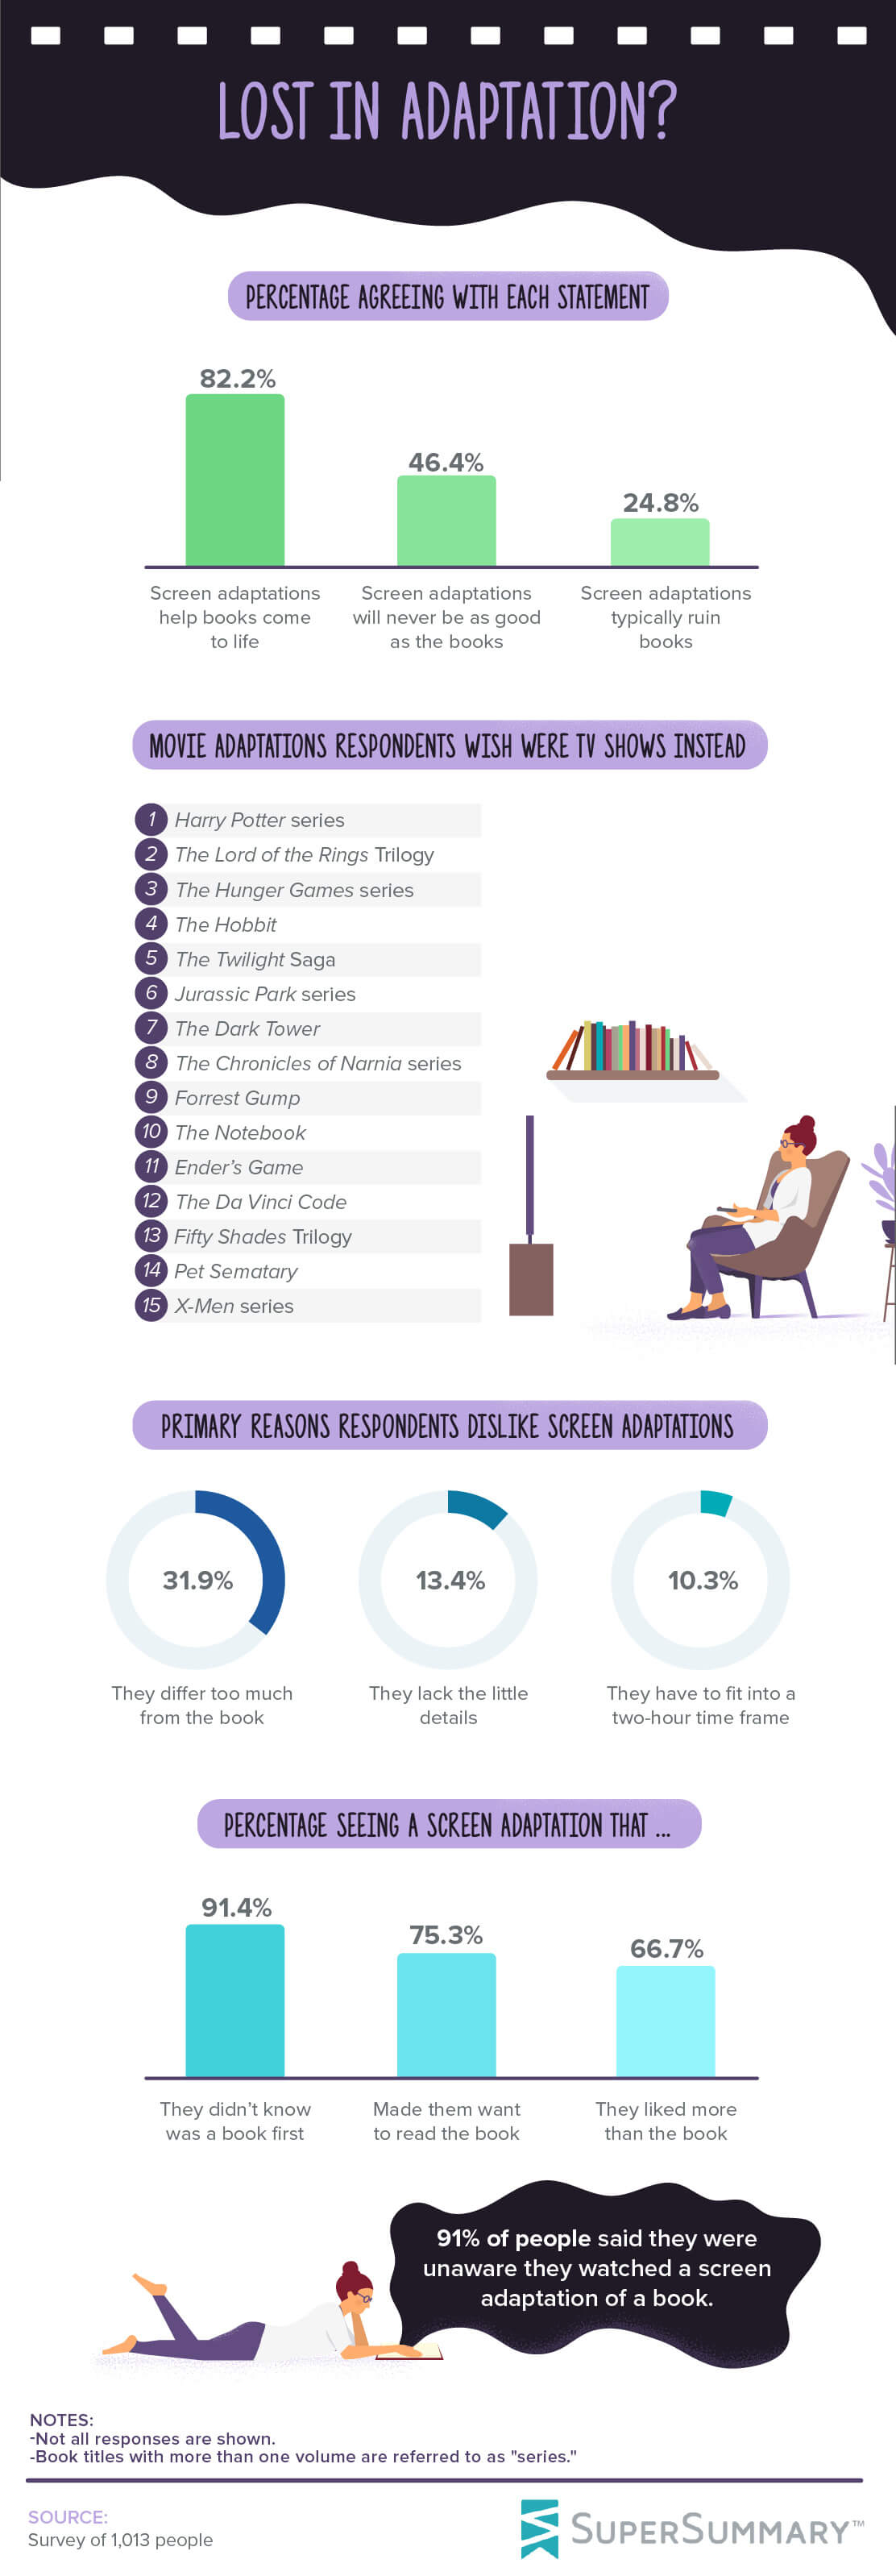 Infographic showing survey respondents likes and dislikes concerning movie adaptations of books.